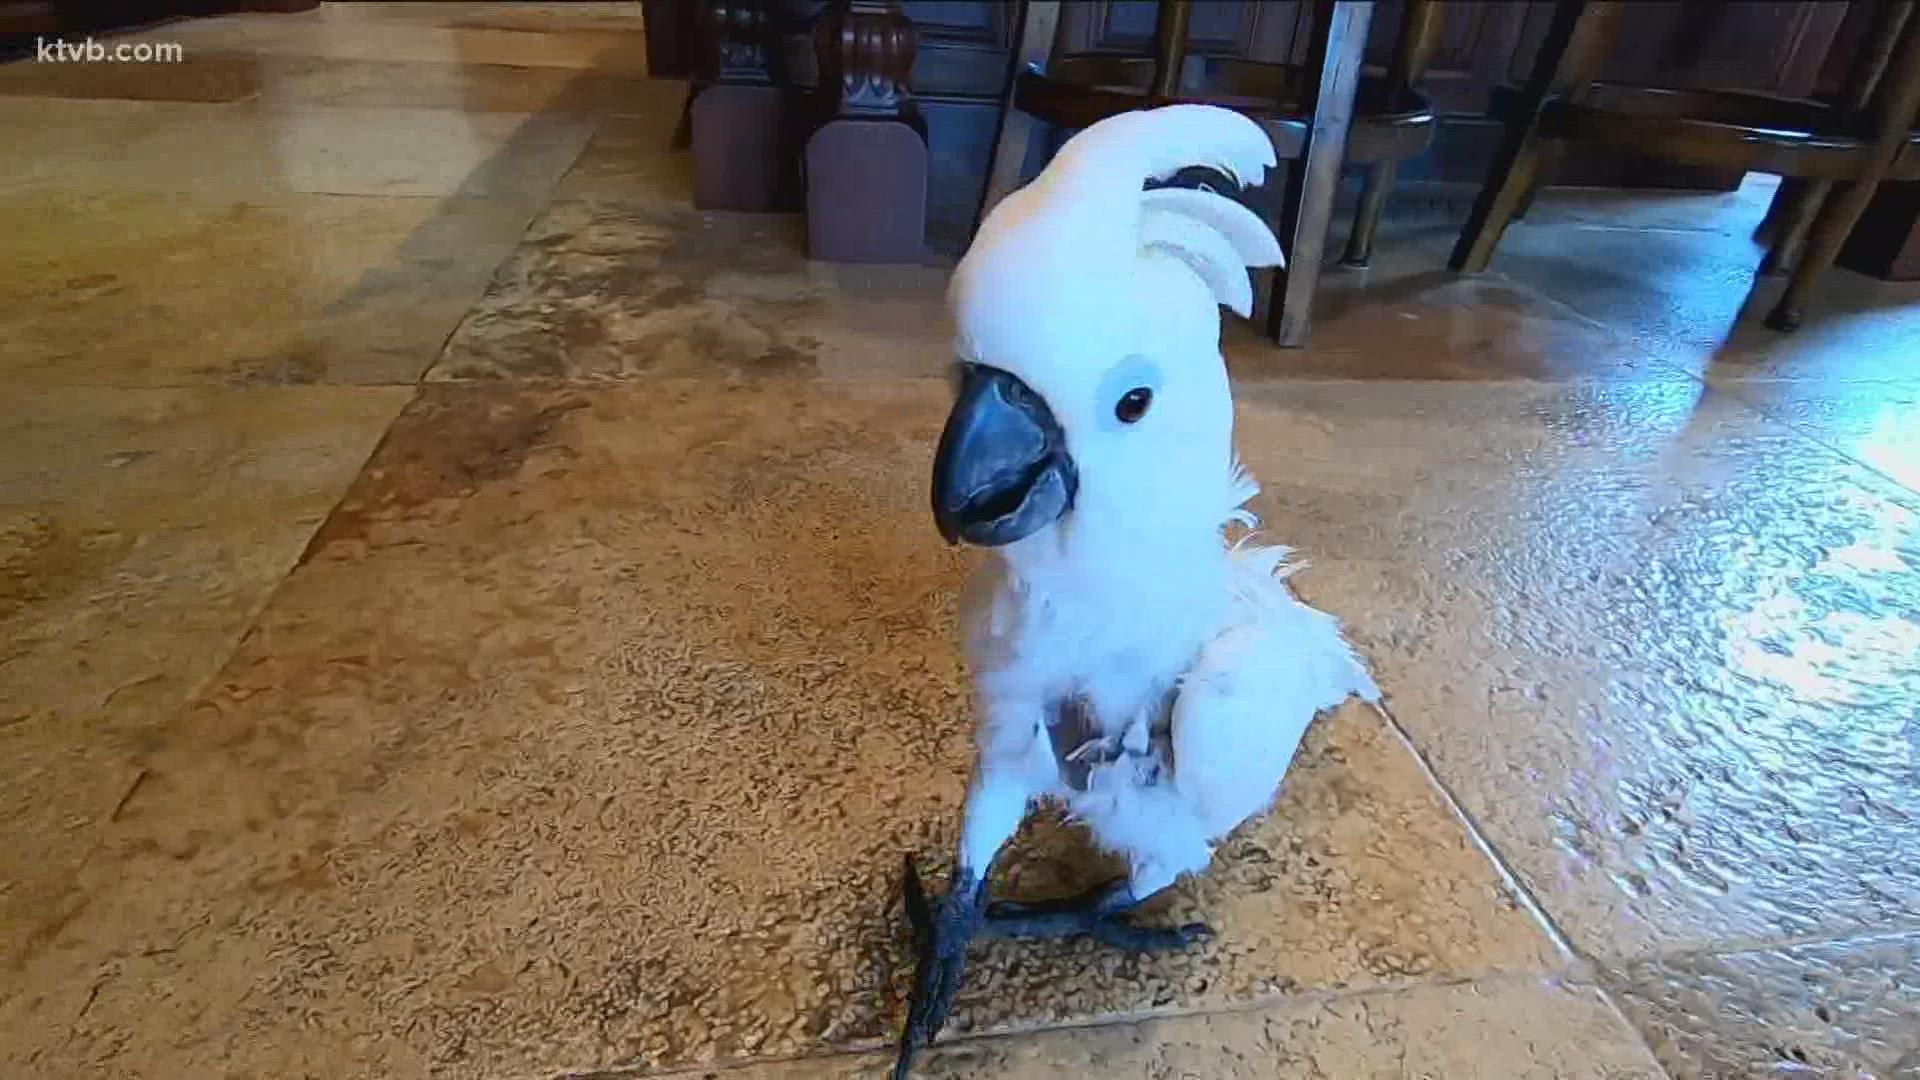 As the Idaho parrot's owner feared she wouldn't survive from an illness, actress Sarah Paulson and hundreds of followers jumped in to help Sweet Pea find treatment.